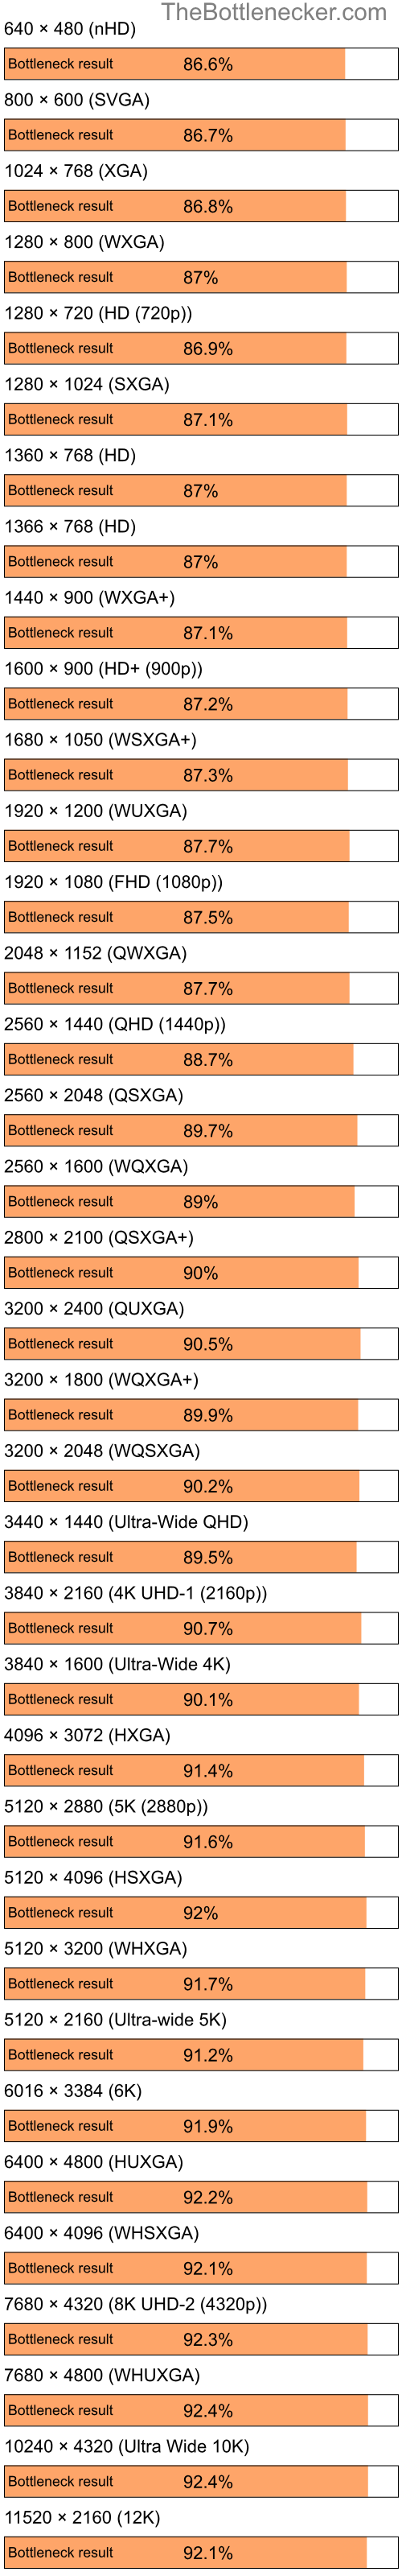 Bottleneck results by resolution for Intel Celeron and NVIDIA GeForce Go 6200 in Graphic Card Intense Tasks